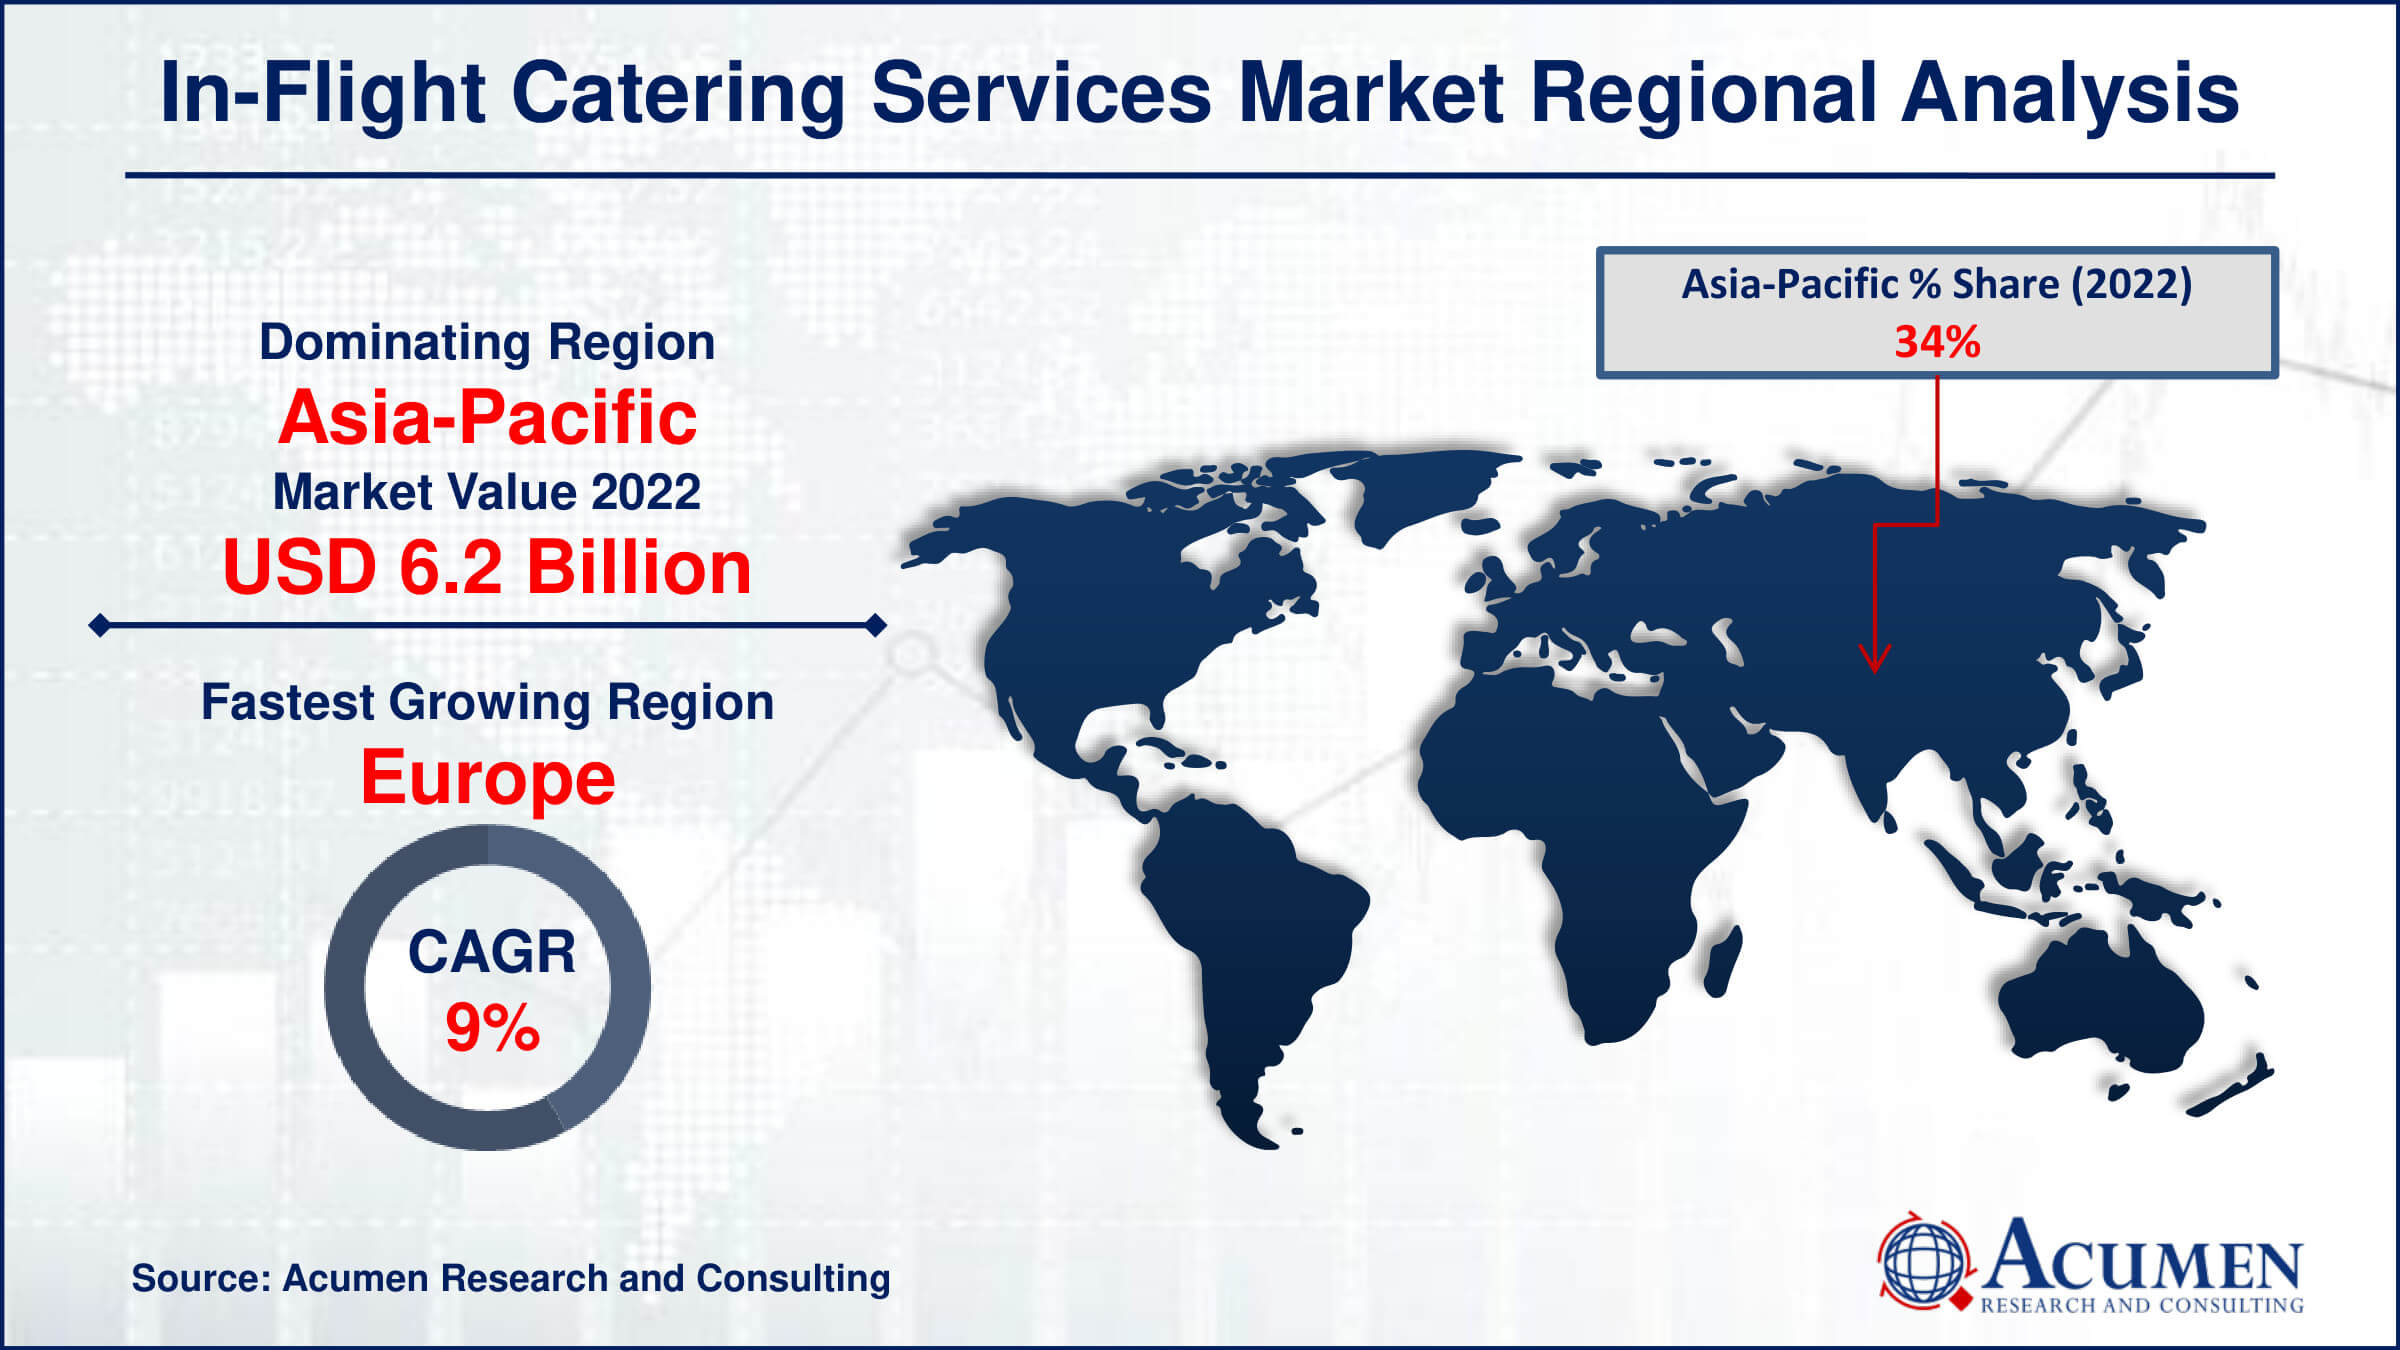 In-Flight Catering Services Market Drivers